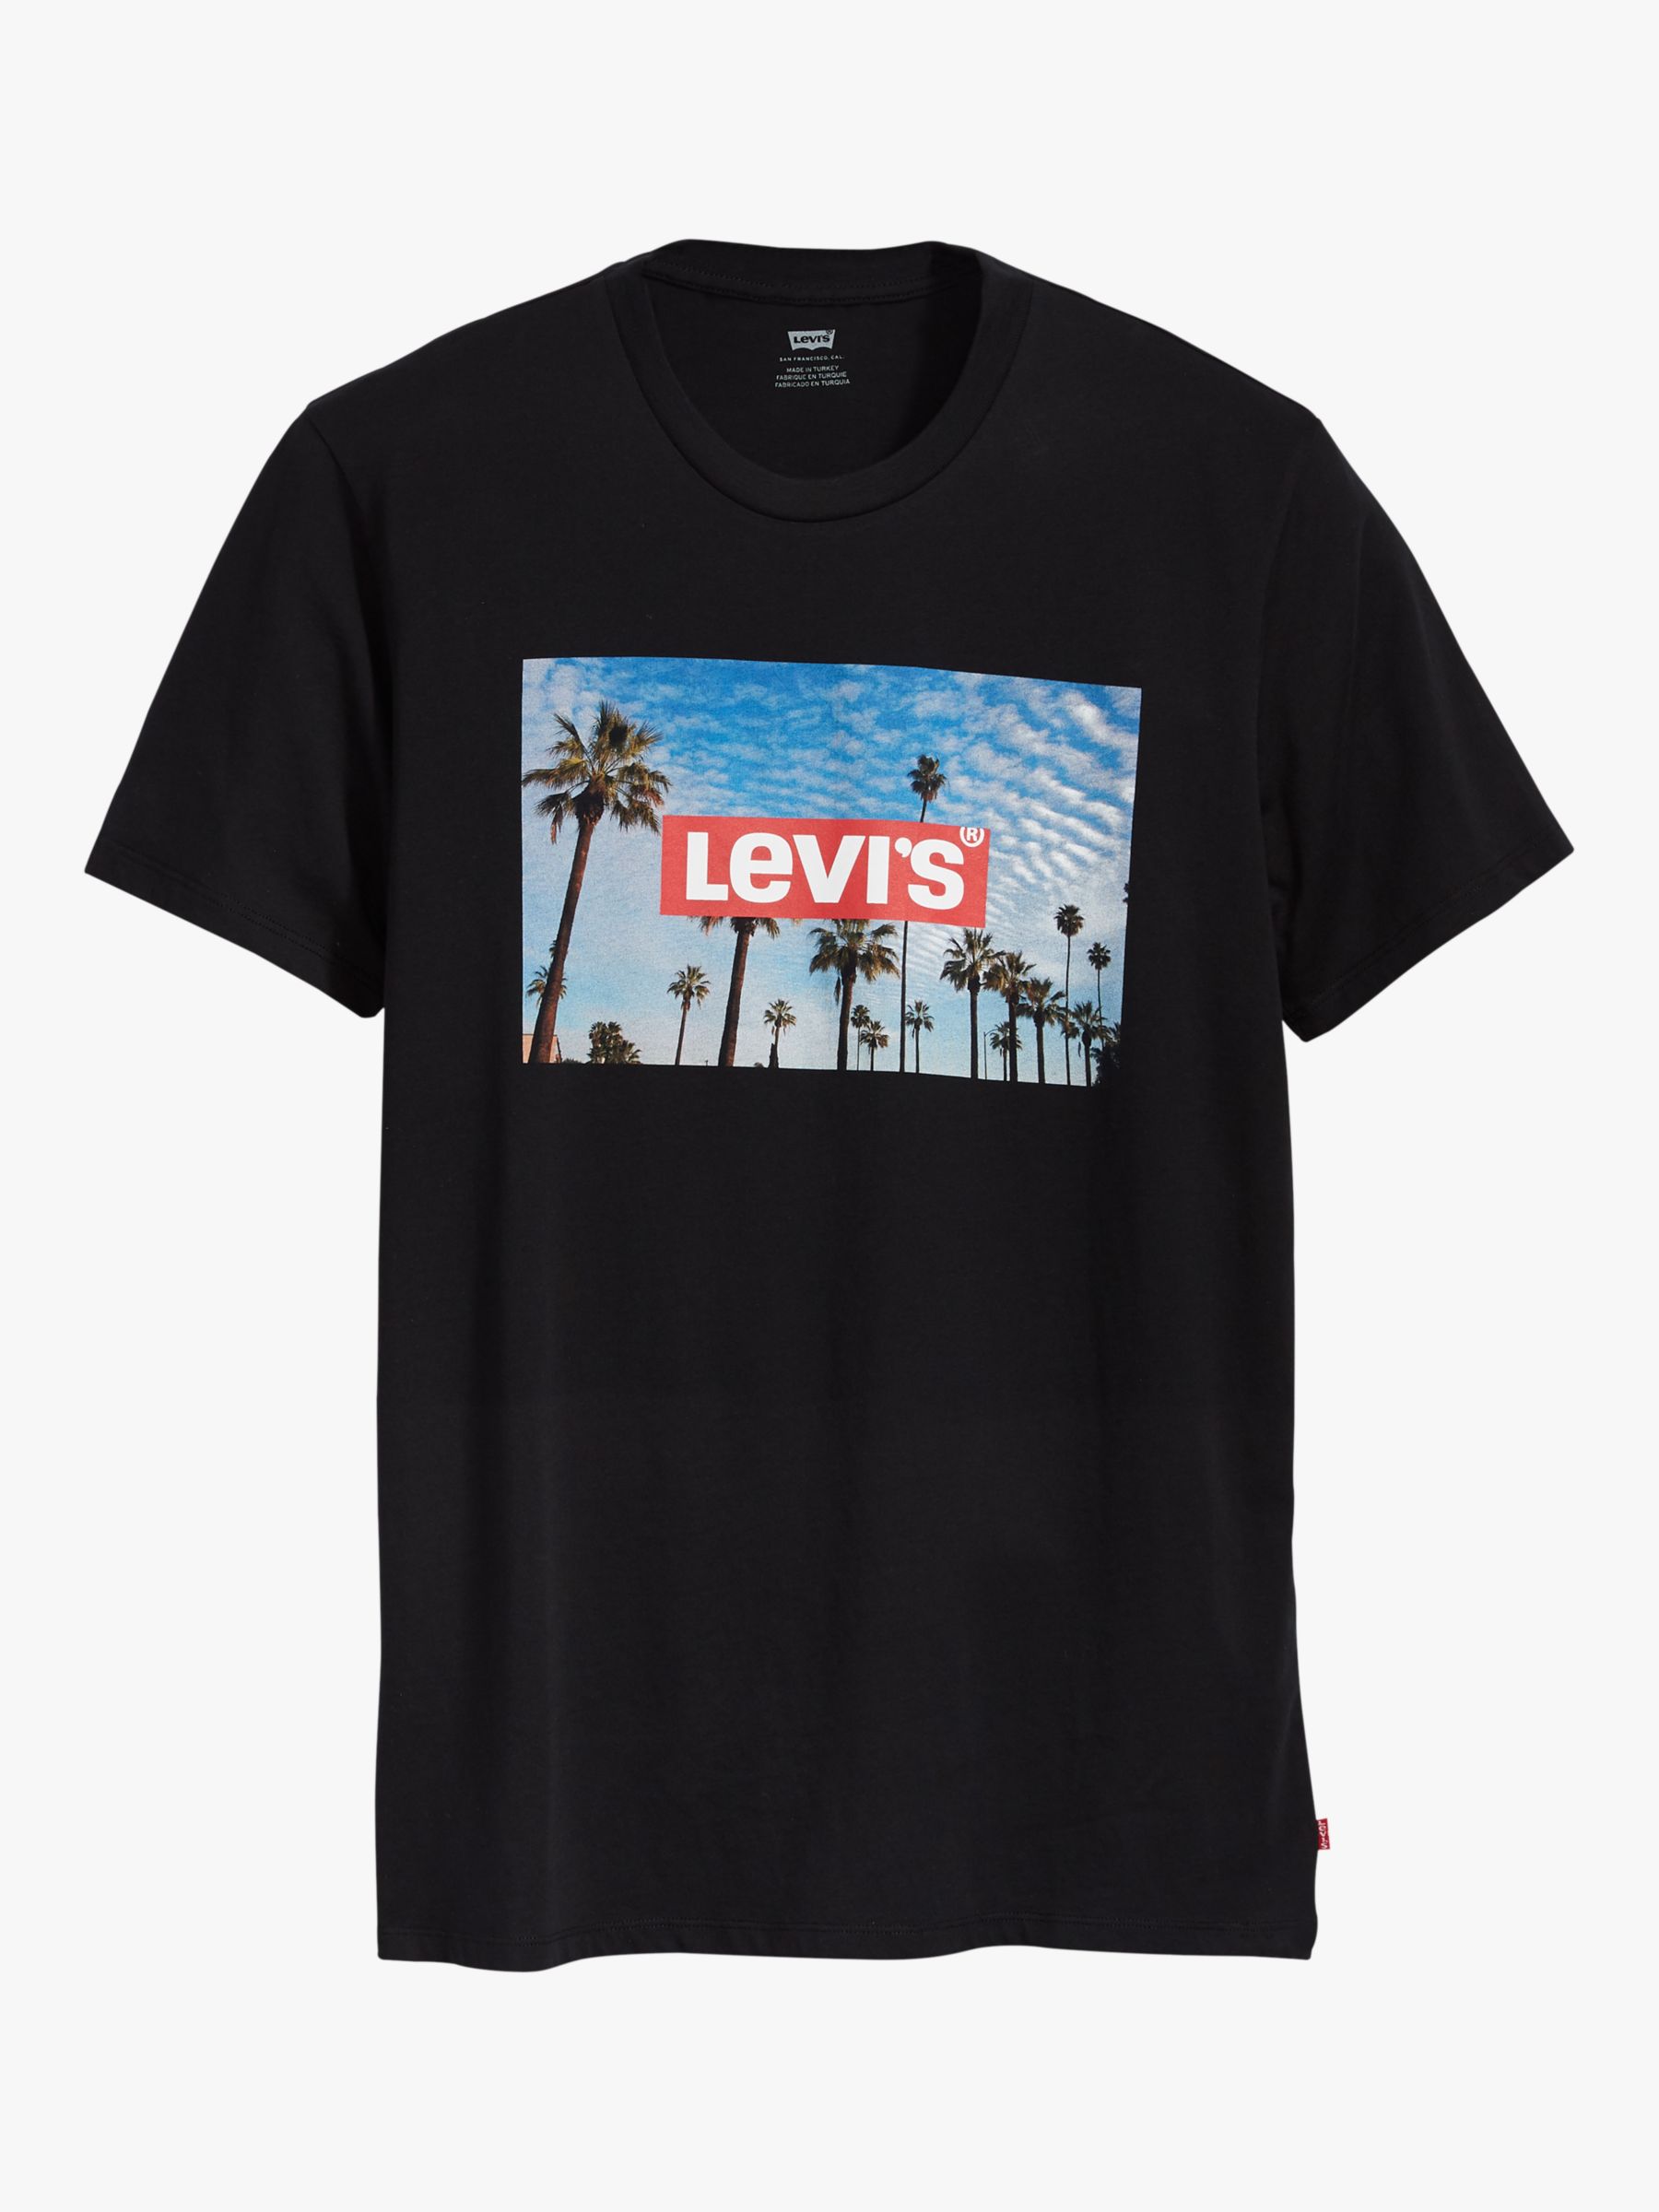 Levi's Short Sleeve Graphic T-Shirt, Mineral Black